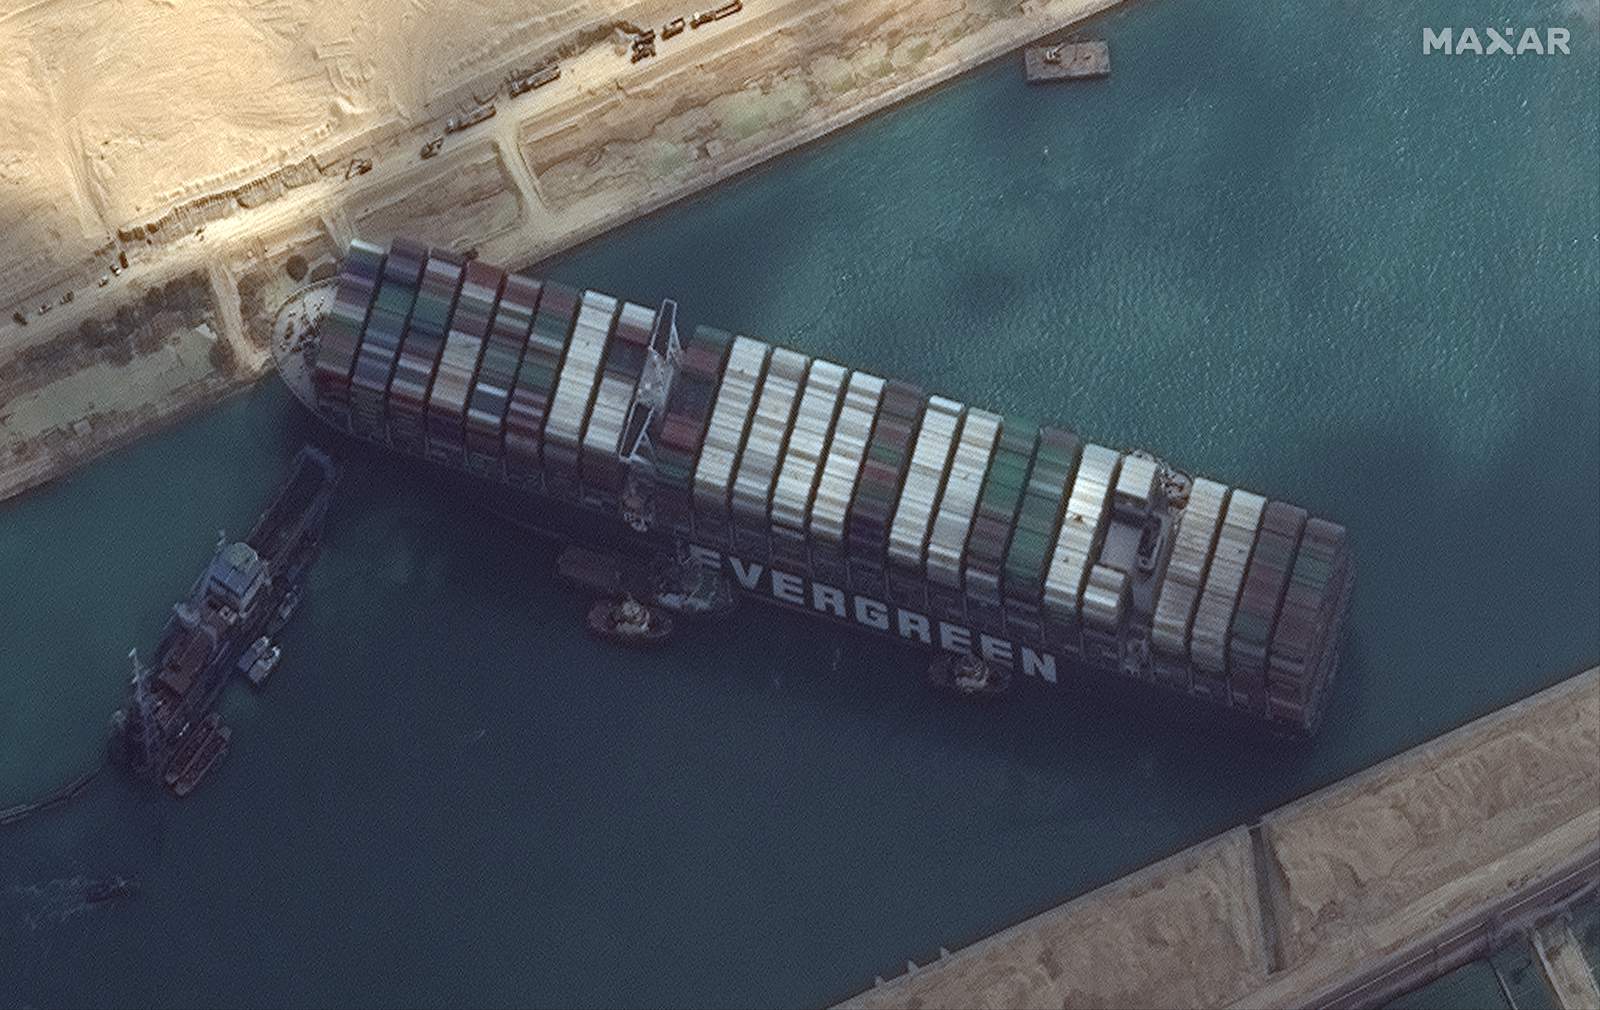 Giant container ship that blocked Suez Canal set free and moving